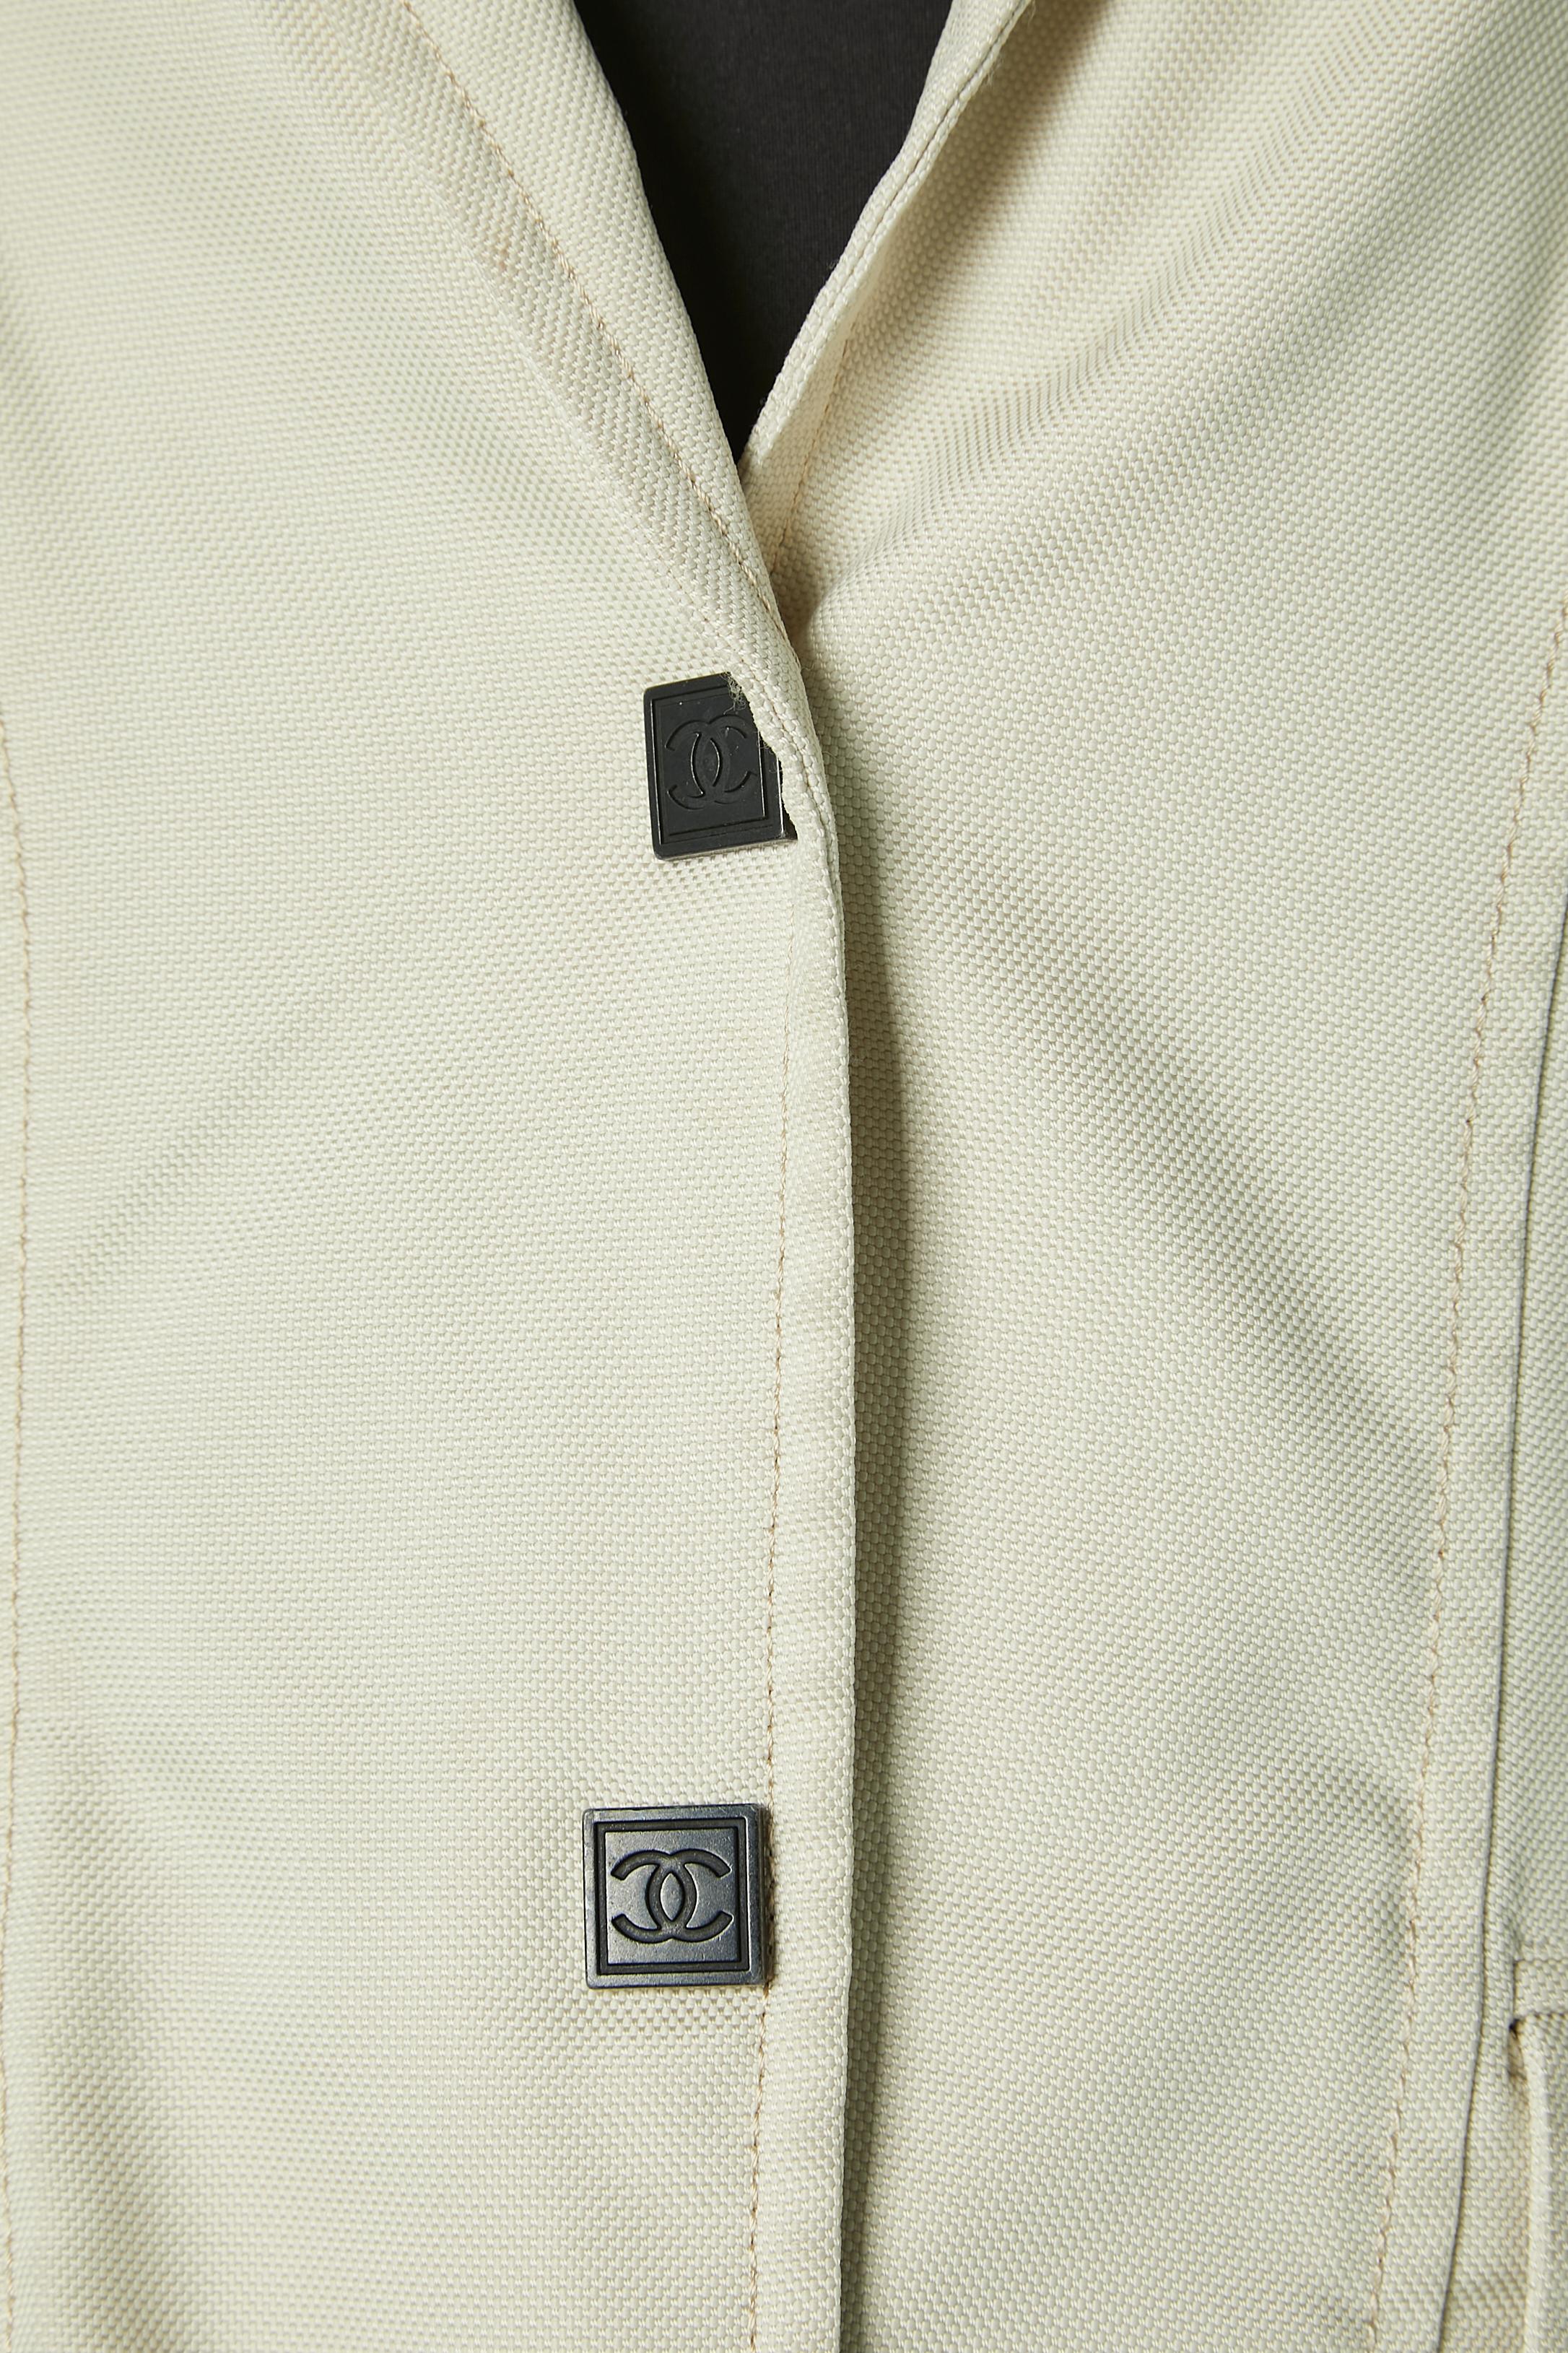 Off-white single-breasted jacket with branded snaps and piping . Fabric composition: 100% polyamide 
Top-stitched and cut-work. Pockets on both side. 
SIZE 42 (Fr) 12 (US)